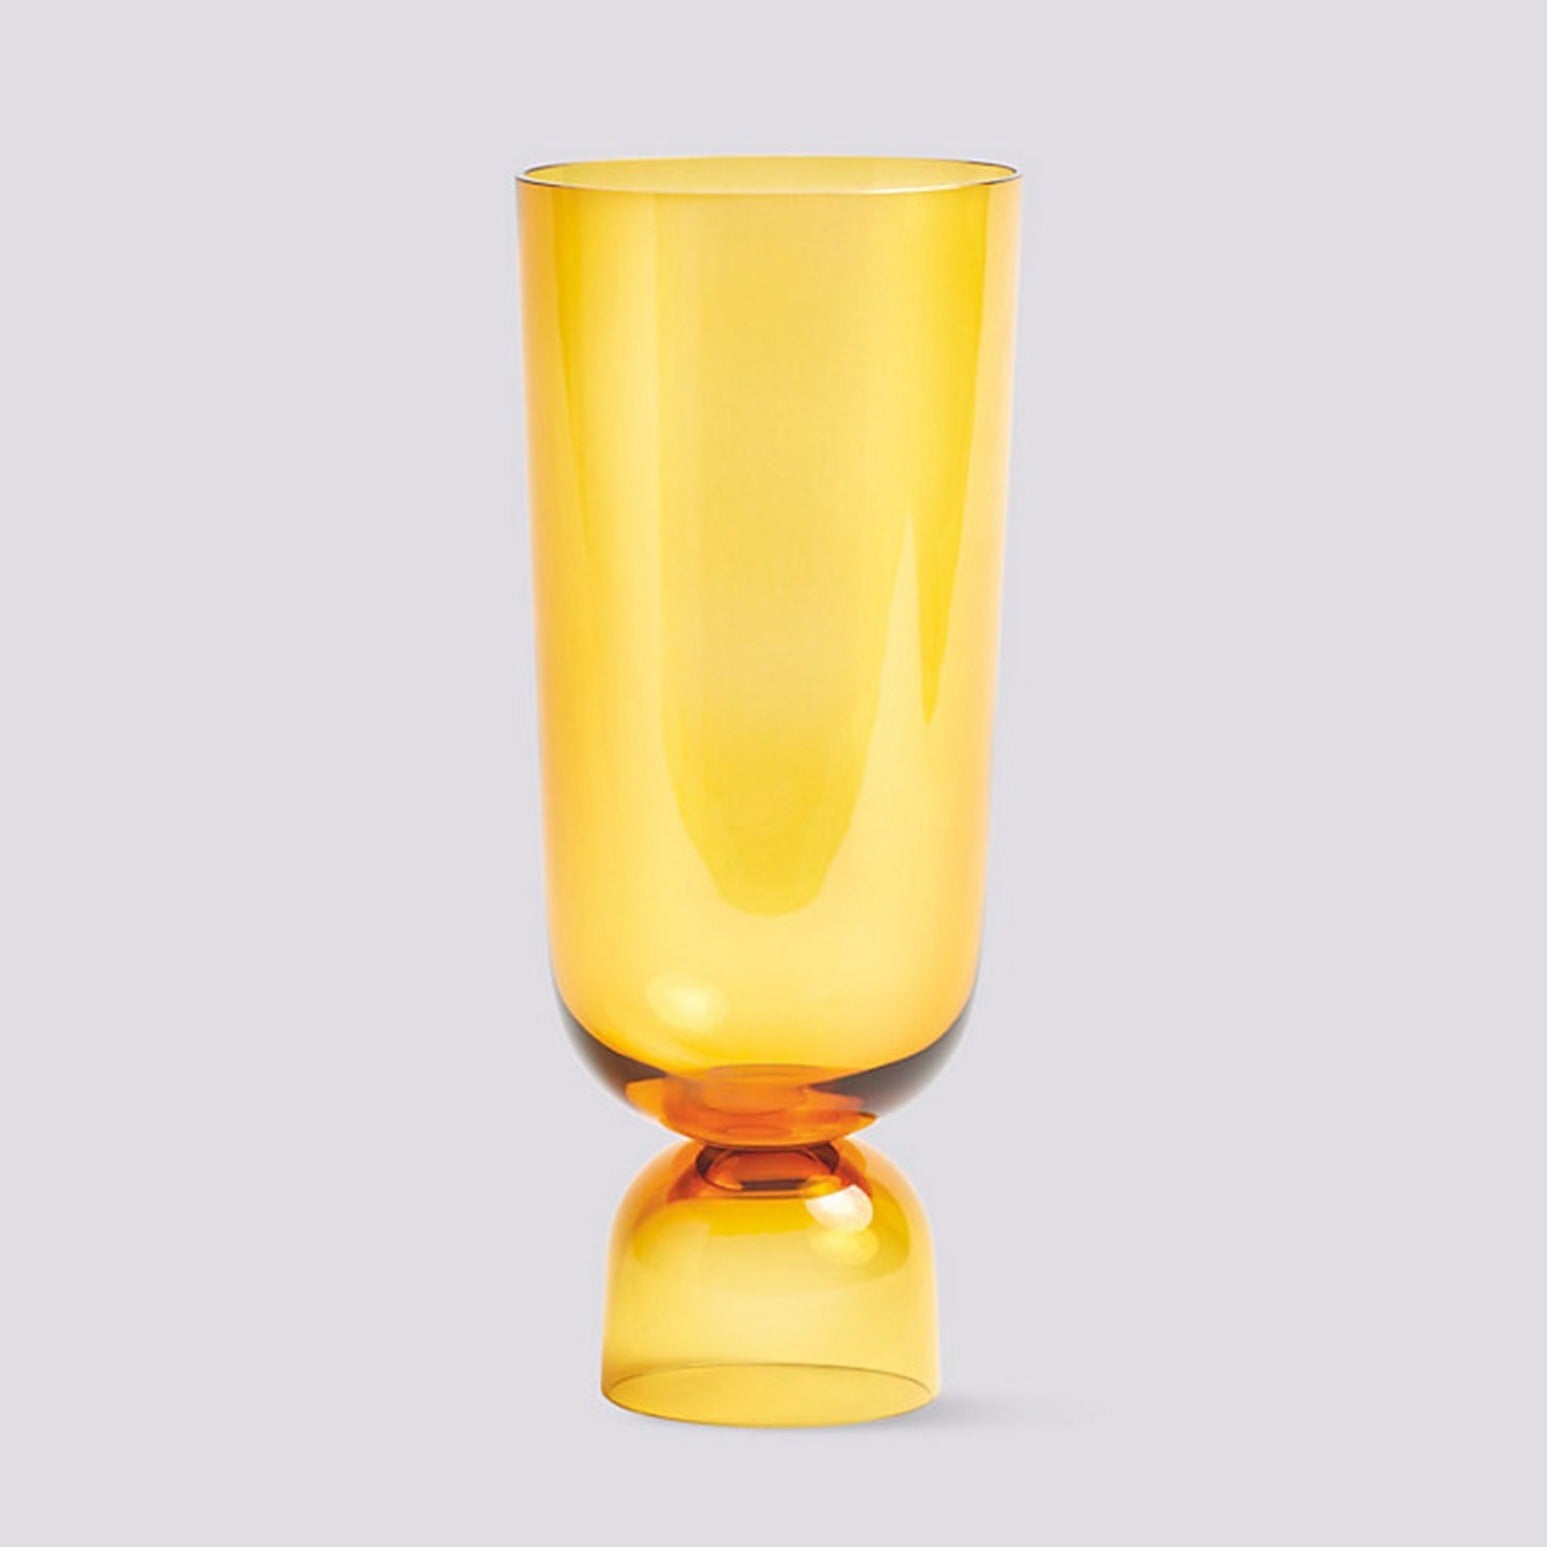 Bottoms Up glass vase in Amber from HAY brand. Available at Easy Tiger Goods Toronto.